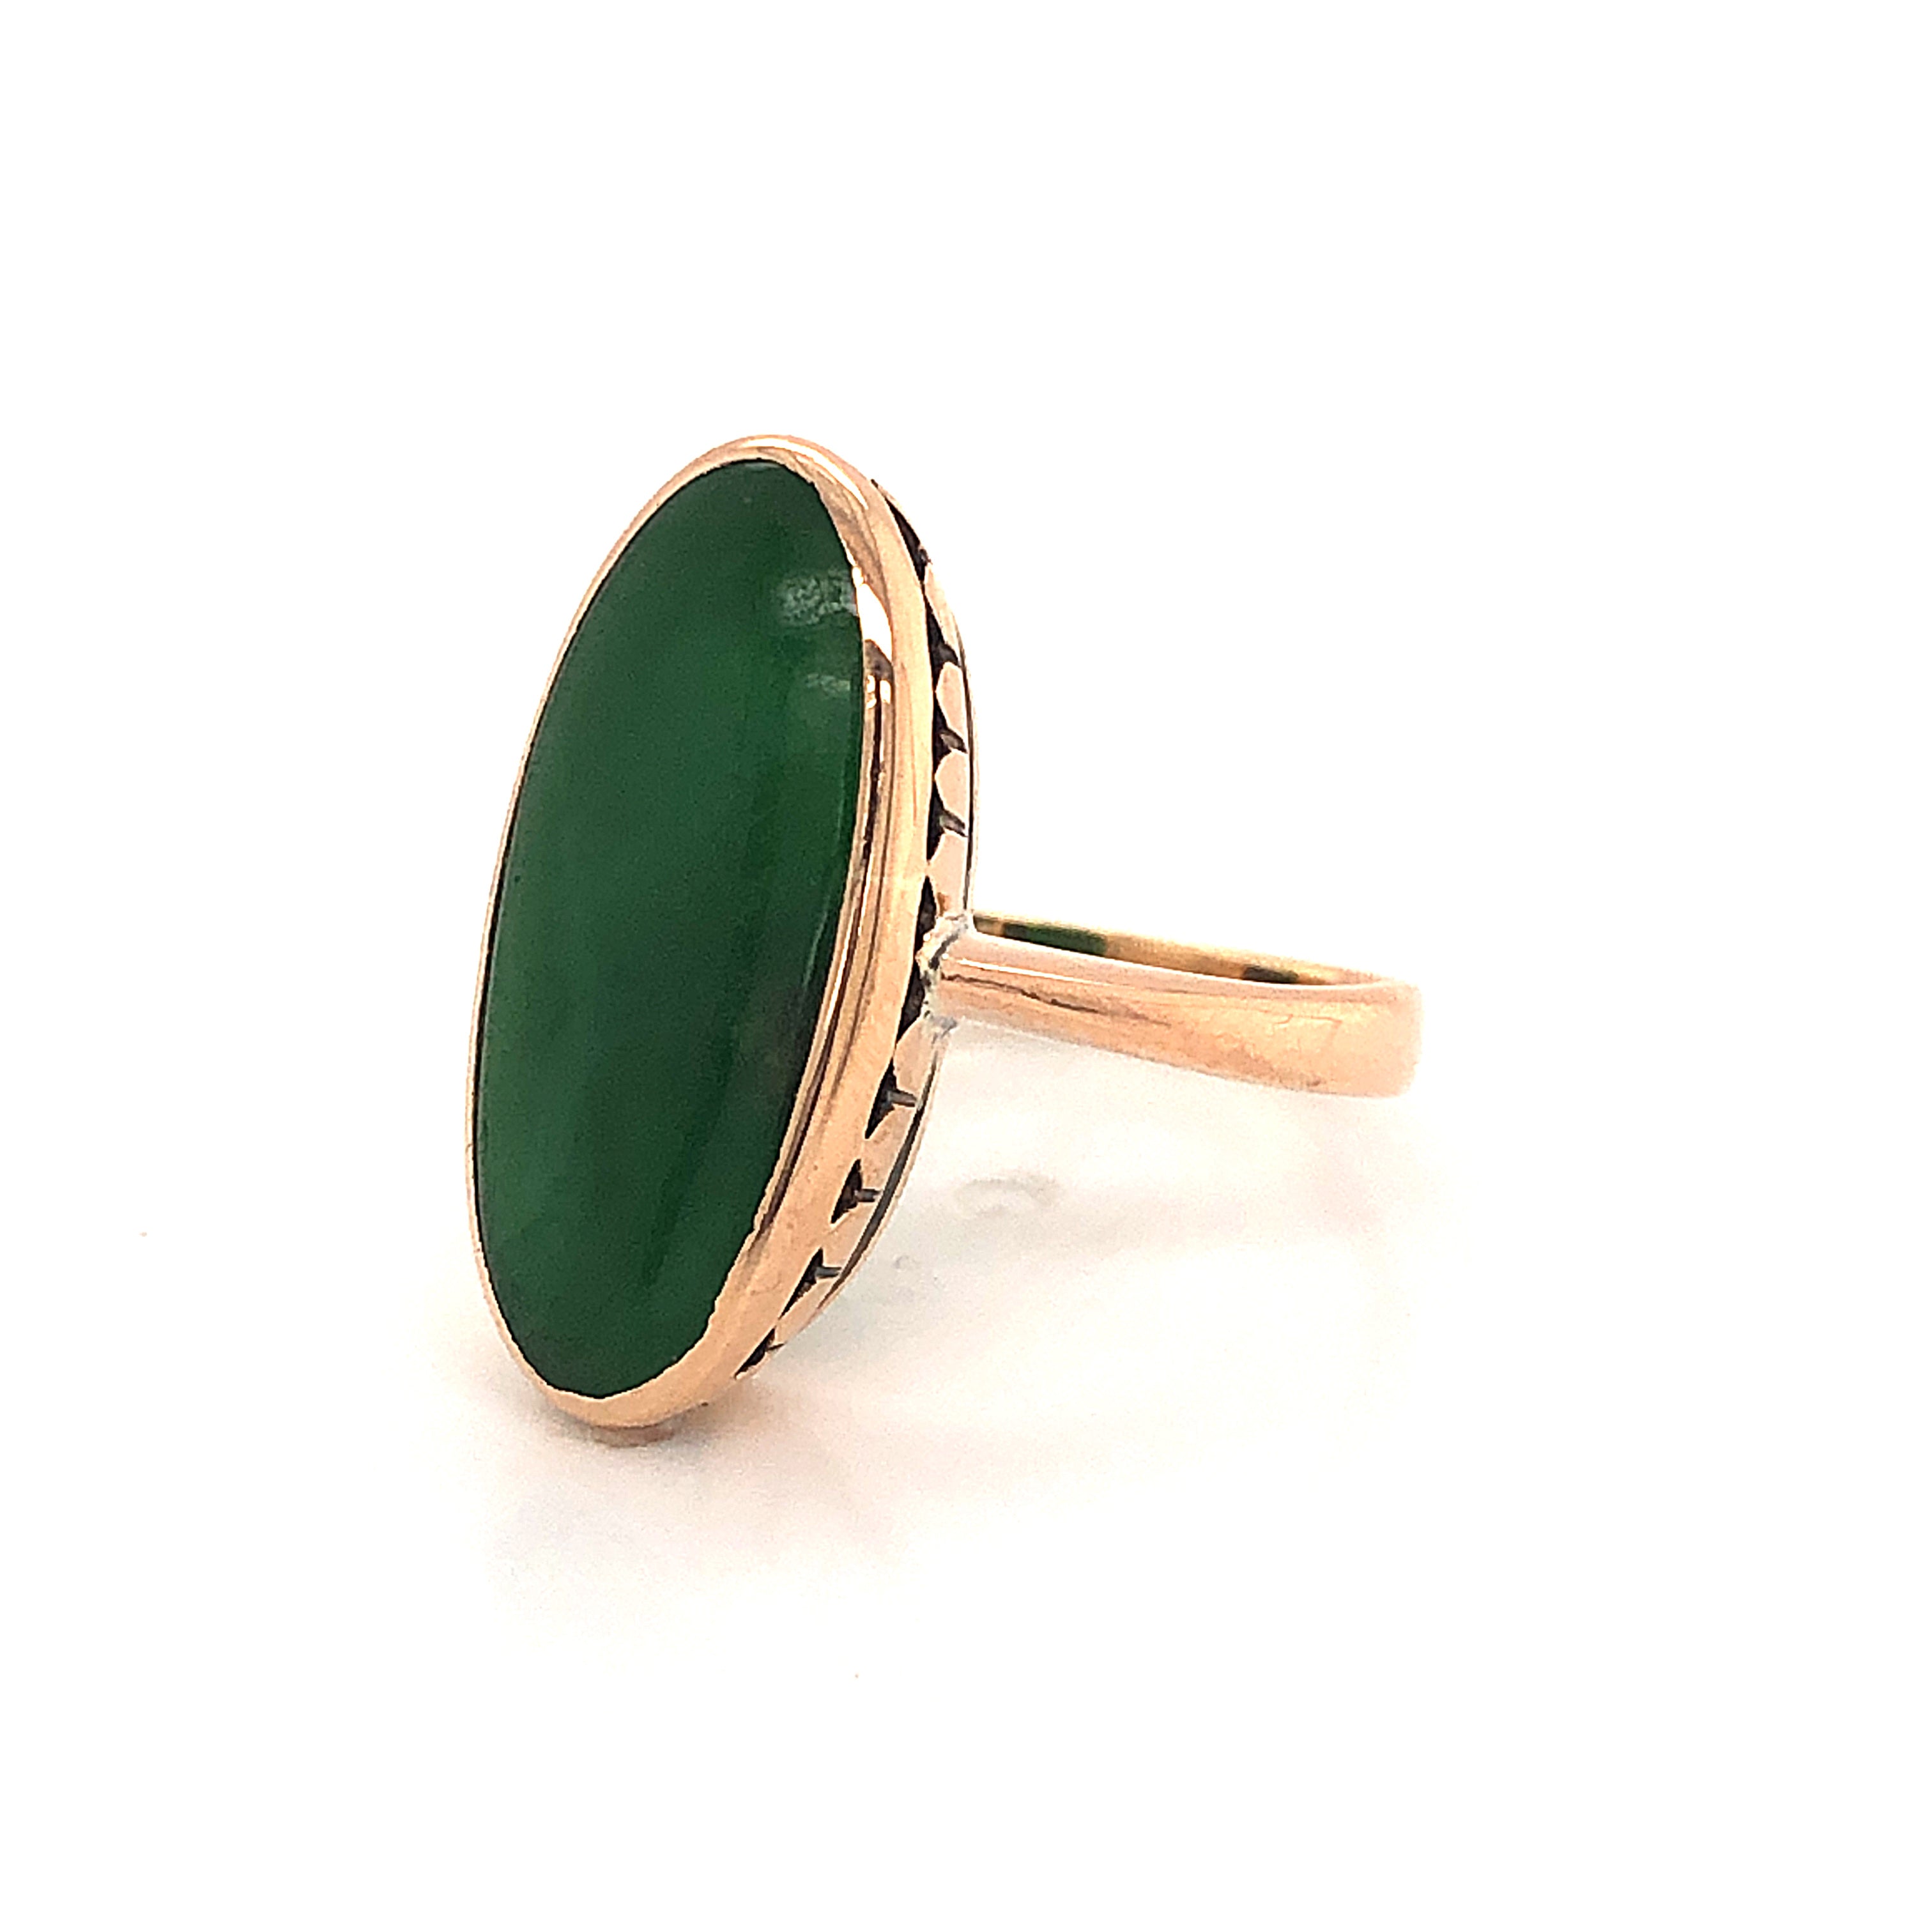 Mid-Century Elongated Oval Jade Ring in 14k Yellow Gold - Filigree